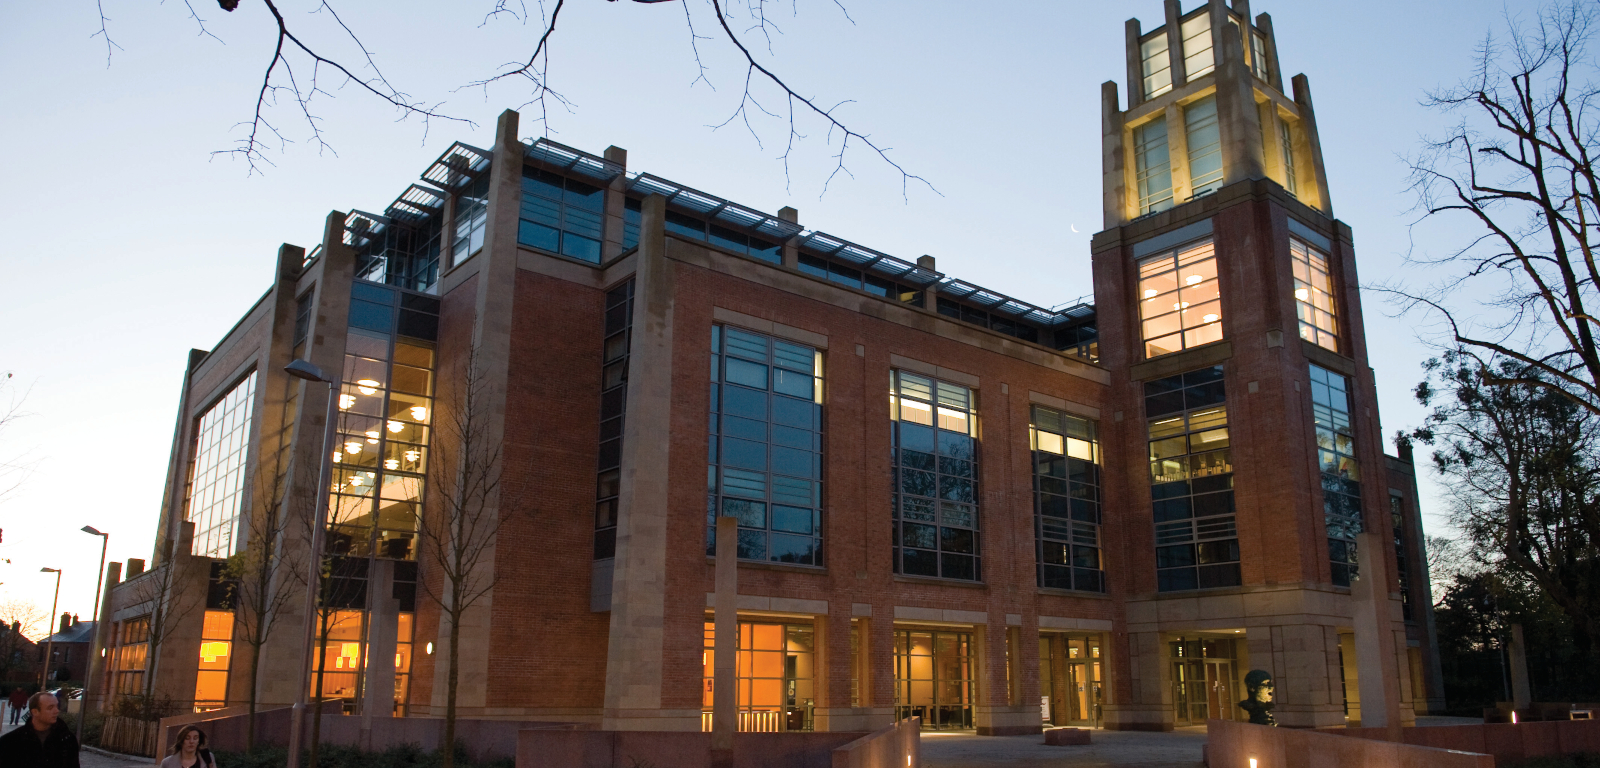 McClay Library - External view, evening, winter